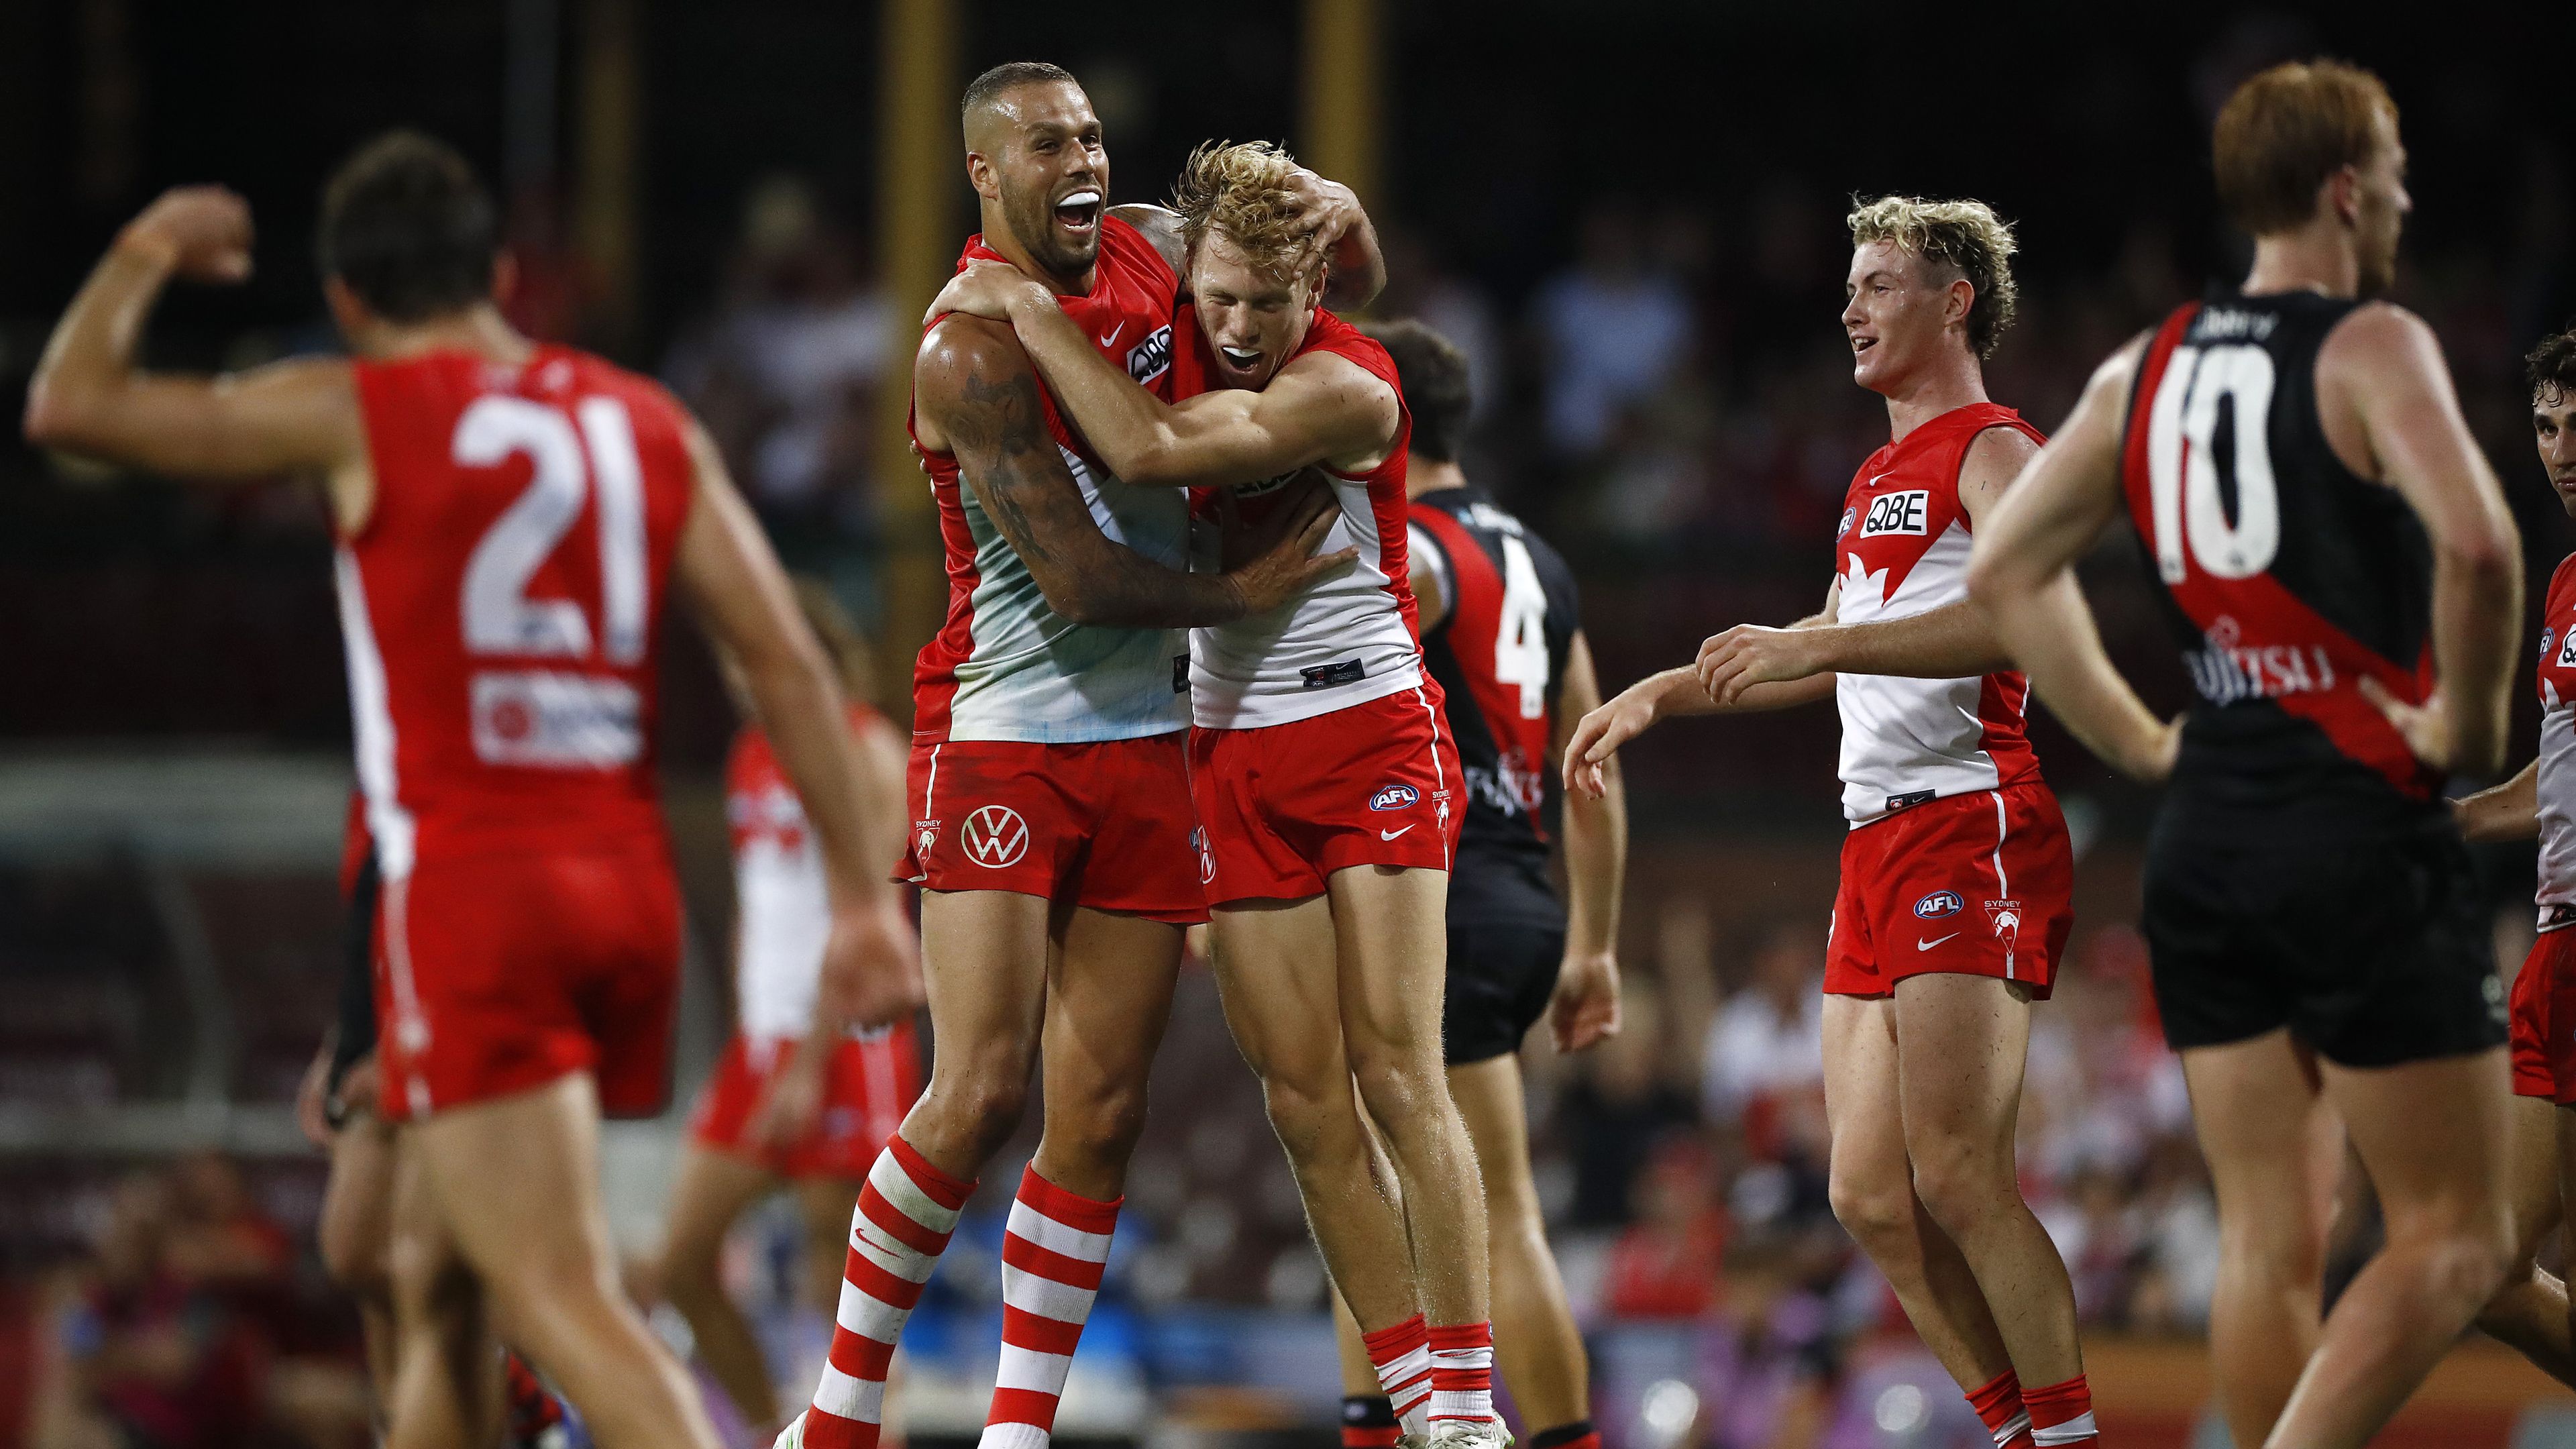 Sydney-based captains want to see fans storm the field to celebrate Lance Franklin's 1000th goal